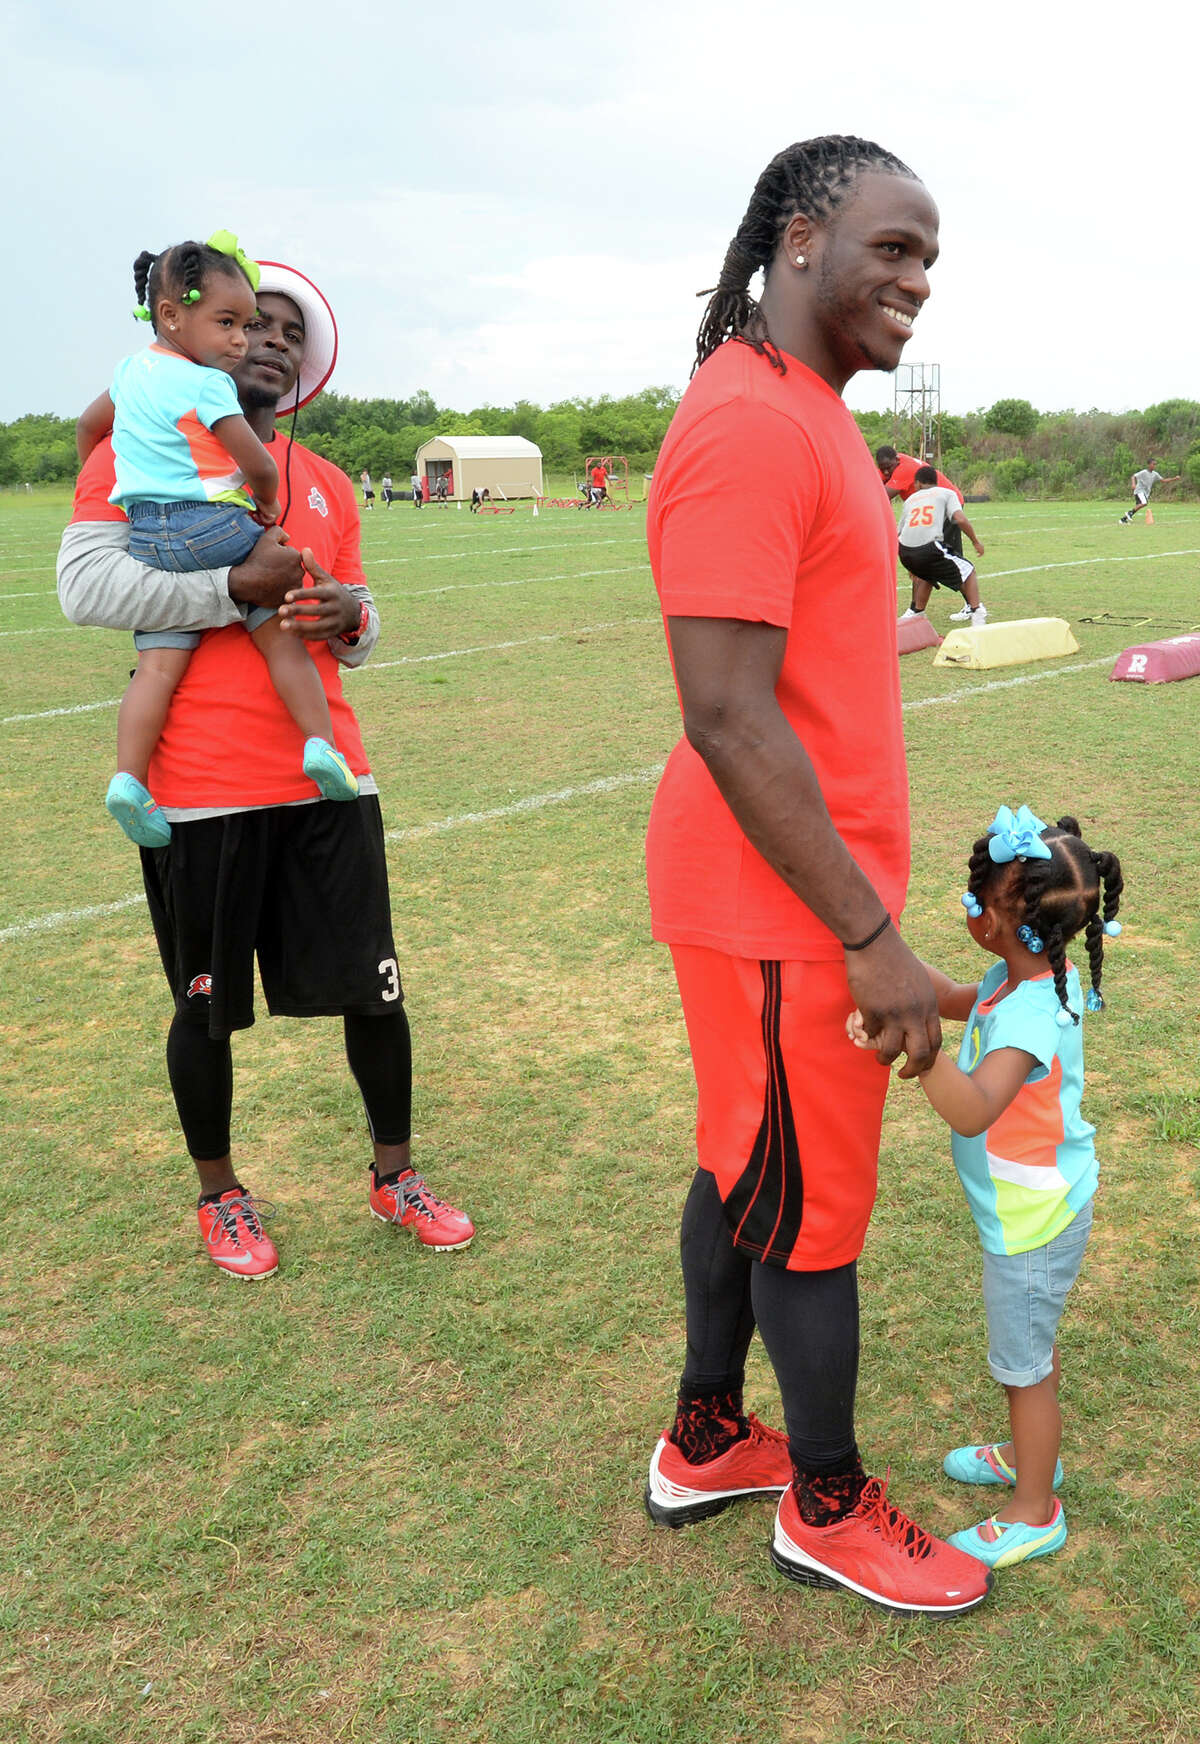 Danny Gorrer, left, holds Makenzie Charles, 2, while Jamaal Charles, 2, holds hands with Makaila Charles, 3, during the famed football player's sports camp at Memorial High School on Friday. Photo taken Friday, June 13, 2014 Guiseppe Barranco/@spotnewsshooter